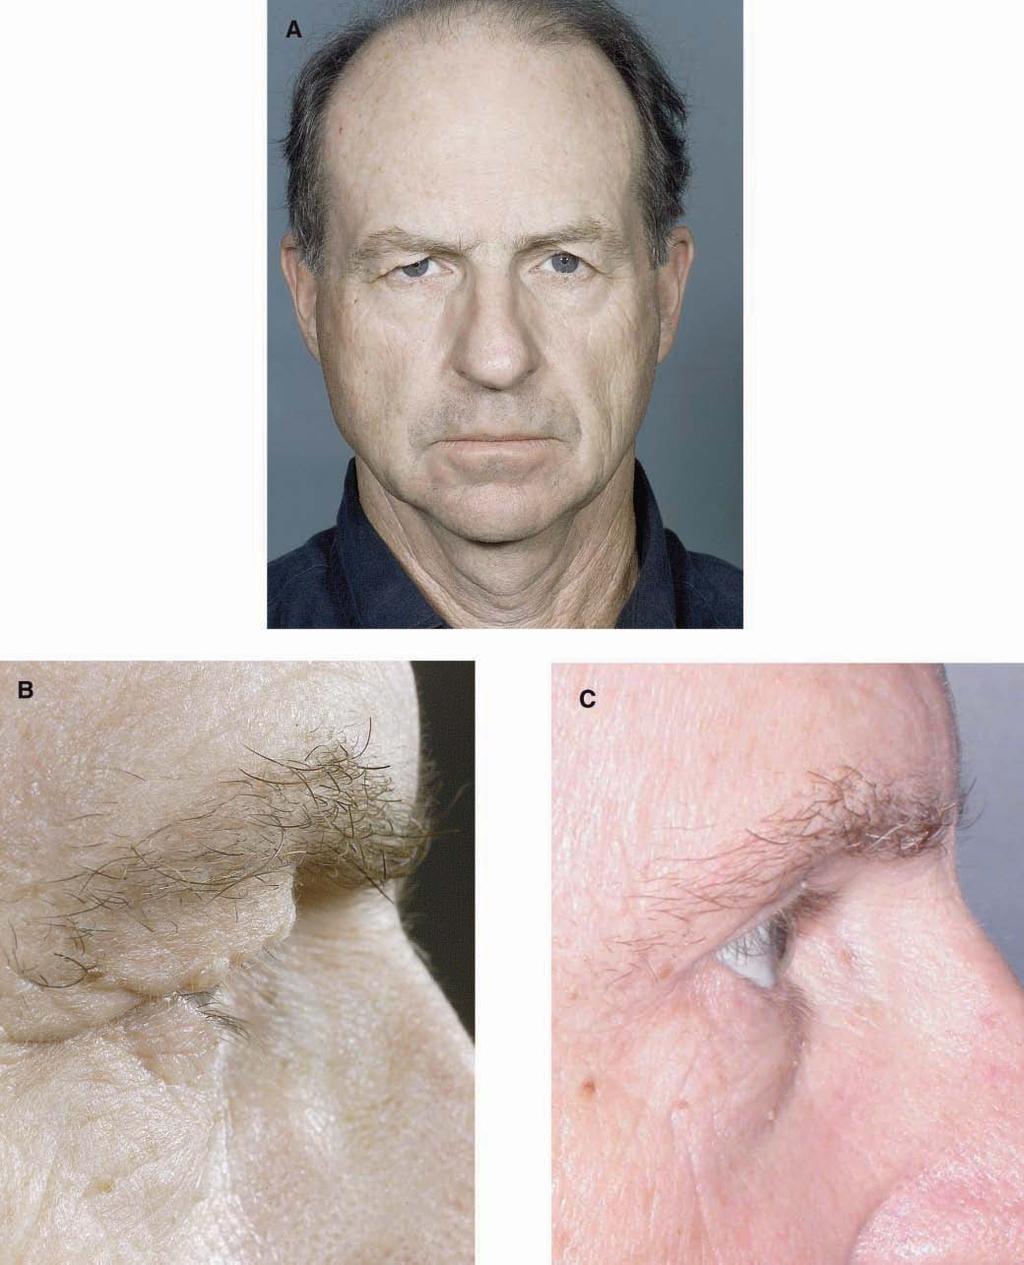 168 Aesthetic Surgery Journal 31(2) Figure 7. (A, B) This 61-year-old man presented with ptotic brows, male-pattern baldness, and hooding of the brow over the eyelid.